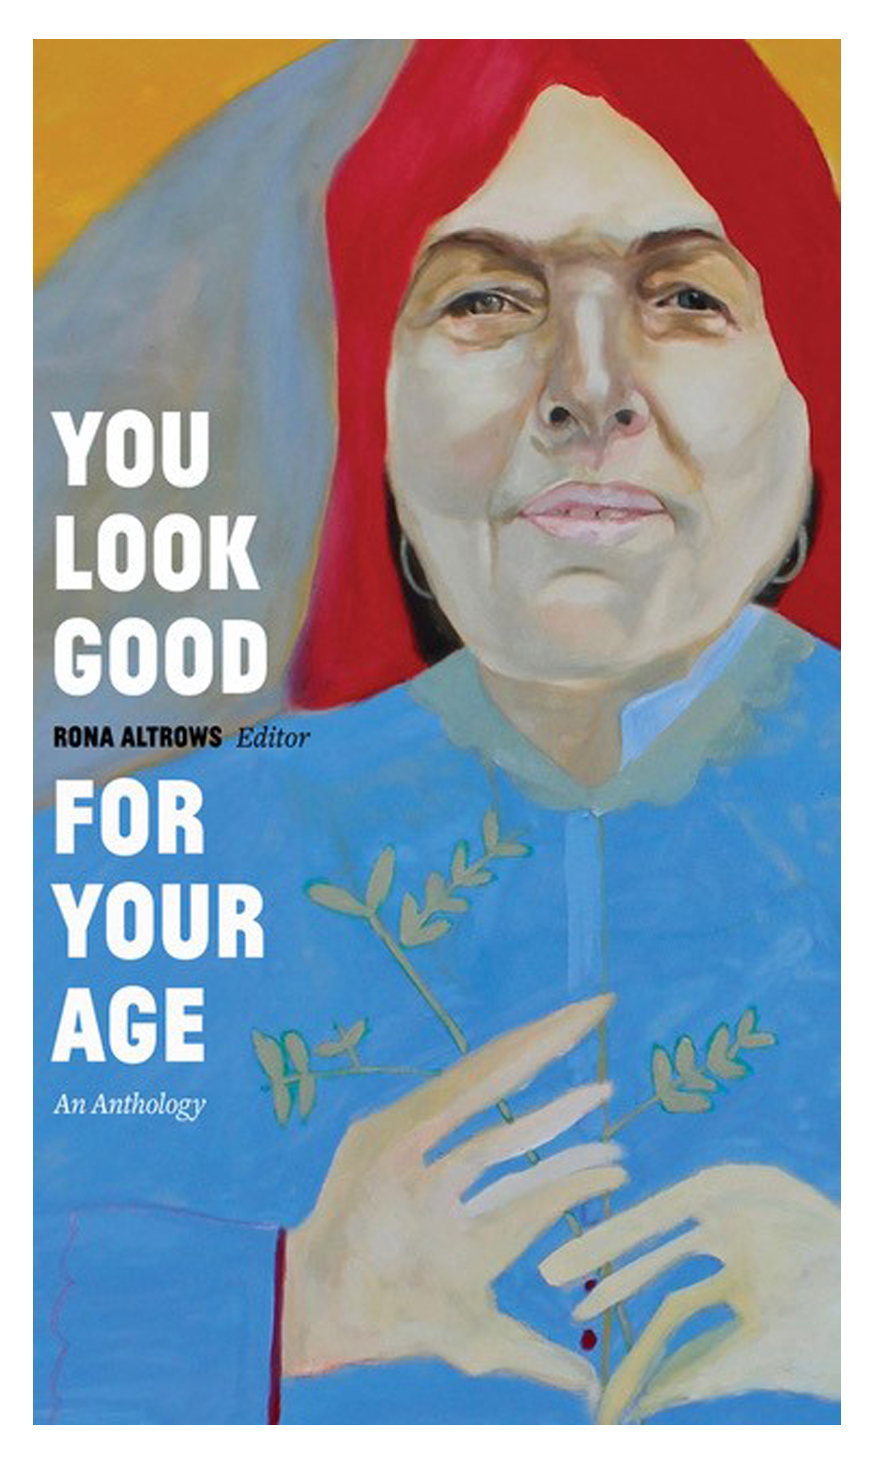 Book cover for "You Look Good for your Age" with oil painting